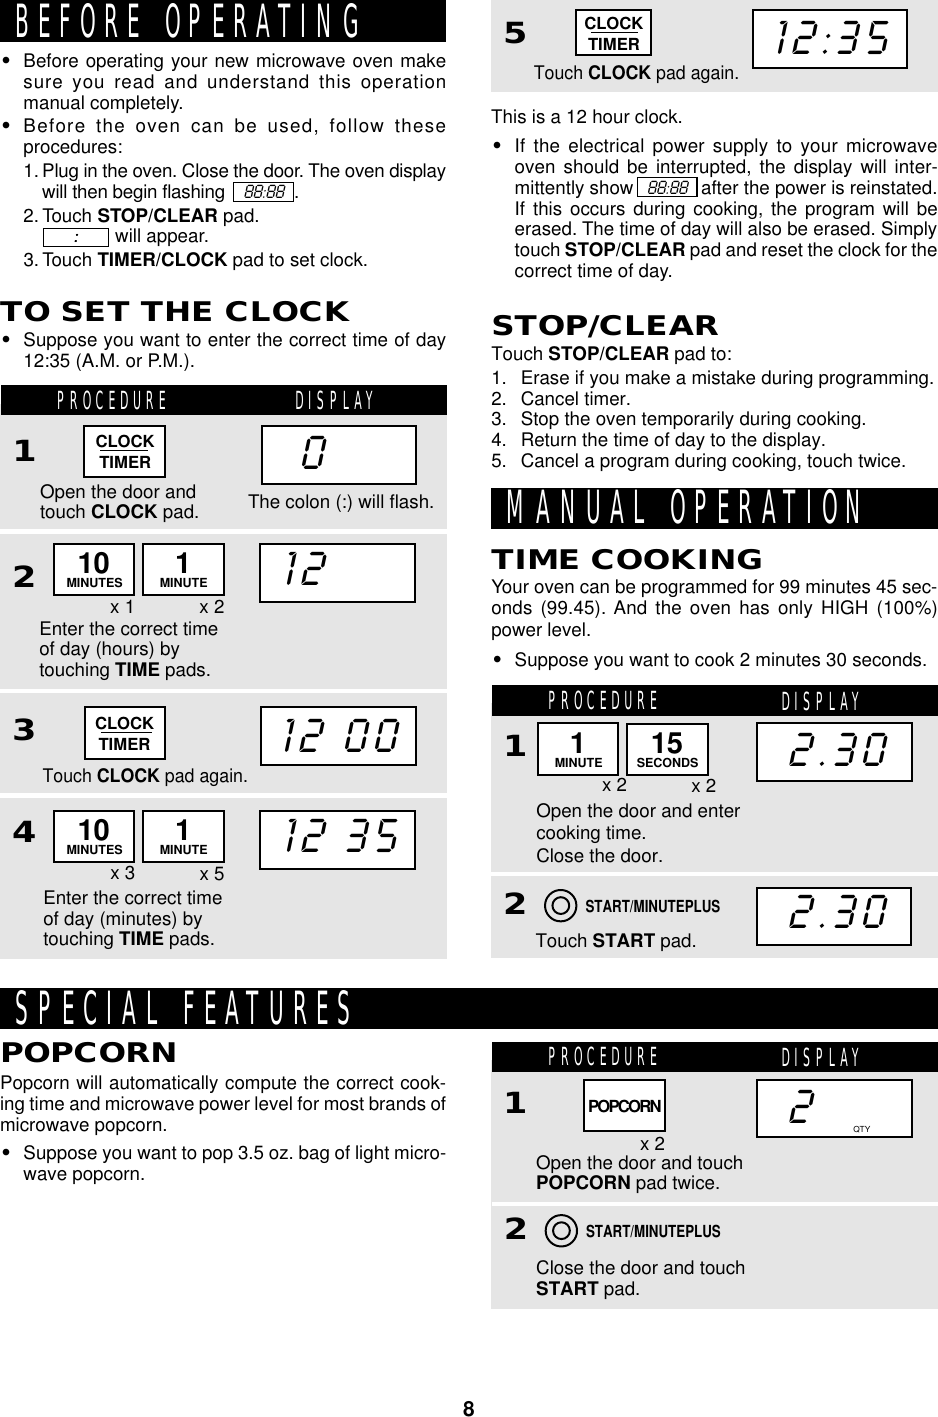 8CLOCKTIMER0BEFORE OPERATING•Before operating your new microwave oven makesure you read and understand this operationmanual completely.•Before the oven can be used, follow theseprocedures:1. Plug in the oven. Close the door. The oven displaywill then begin flashing     88:88   .2. Touch STOP/CLEAR pad.              will appear.3. Touch TIMER/CLOCK pad to set clock.:::::TO SET THE CLOCK•Suppose you want to enter the correct time of day12:35 (A.M. or P.M.).PROCEDURE DISPLAY1Open the door andtouch CLOCK pad.Enter the correct timeof day (hours) bytouching TIME pads.2312Touch CLOCK pad again.12 35MANUAL OPERATIONYour oven can be programmed for 99 minutes 45 sec-onds (99.45). And the oven has only HIGH (100%)power level.•Suppose you want to cook 2 minutes 30 seconds.TIME COOKINGThe colon (:) will flash.x 1 x 2CLOCKTIMER12 0010MINUTES 1MINUTEx 3 x 510MINUTES 1MINUTE4Enter the correct timeof day (minutes) bytouching TIME pads.This is a 12 hour clock.•If the electrical power supply to your microwaveoven should be interrupted, the display will inter-mittently show    88:88   after the power is reinstated.If this occurs during cooking, the program will beerased. The time of day will also be erased. Simplytouch STOP/CLEAR pad and reset the clock for thecorrect time of day.STOP/CLEARTouch STOP/CLEAR pad to:1. Erase if you make a mistake during programming.2. Cancel timer.3. Stop the oven temporarily during cooking.4. Return the time of day to the display.5. Cancel a program during cooking, touch twice.PROCEDURE DISPLAY1Open the door and entercooking time.Close the door.Touch START pad.22.302.30x 2 x 2START/MINUTEPLUS5Touch CLOCK pad again.CLOCKTIMER12:35SPECIAL FEATURESPopcorn will automatically compute the correct cook-ing time and microwave power level for most brands ofmicrowave popcorn.•Suppose you want to pop 3.5 oz. bag of light micro-wave popcorn.POPCORNPROCEDURE DISPLAY1Open the door and touchPOPCORN pad twice.Close the door and touchSTART pad.22x 2START/MINUTEPLUSQTYPOPCORN1MINUTE 15SECONDS